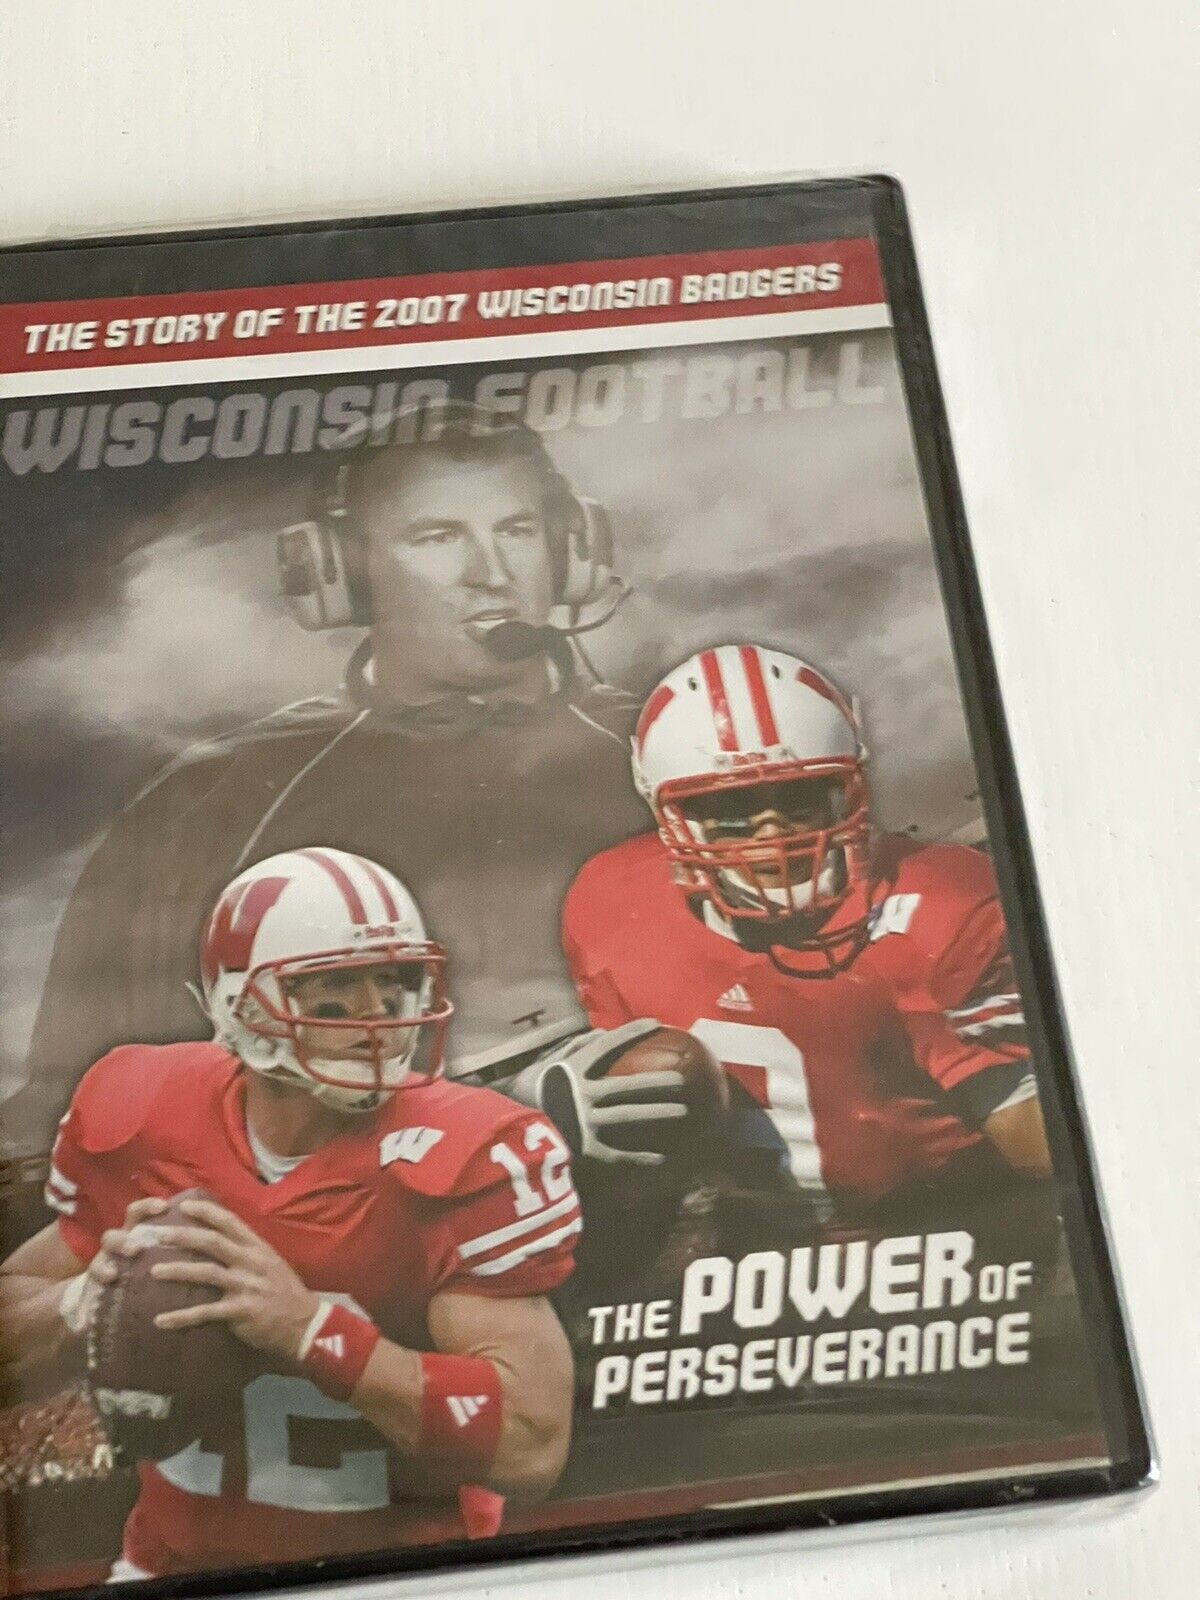 The Power Of Perseverance The Story Of 2007 Wisconsin Badgers DVD New